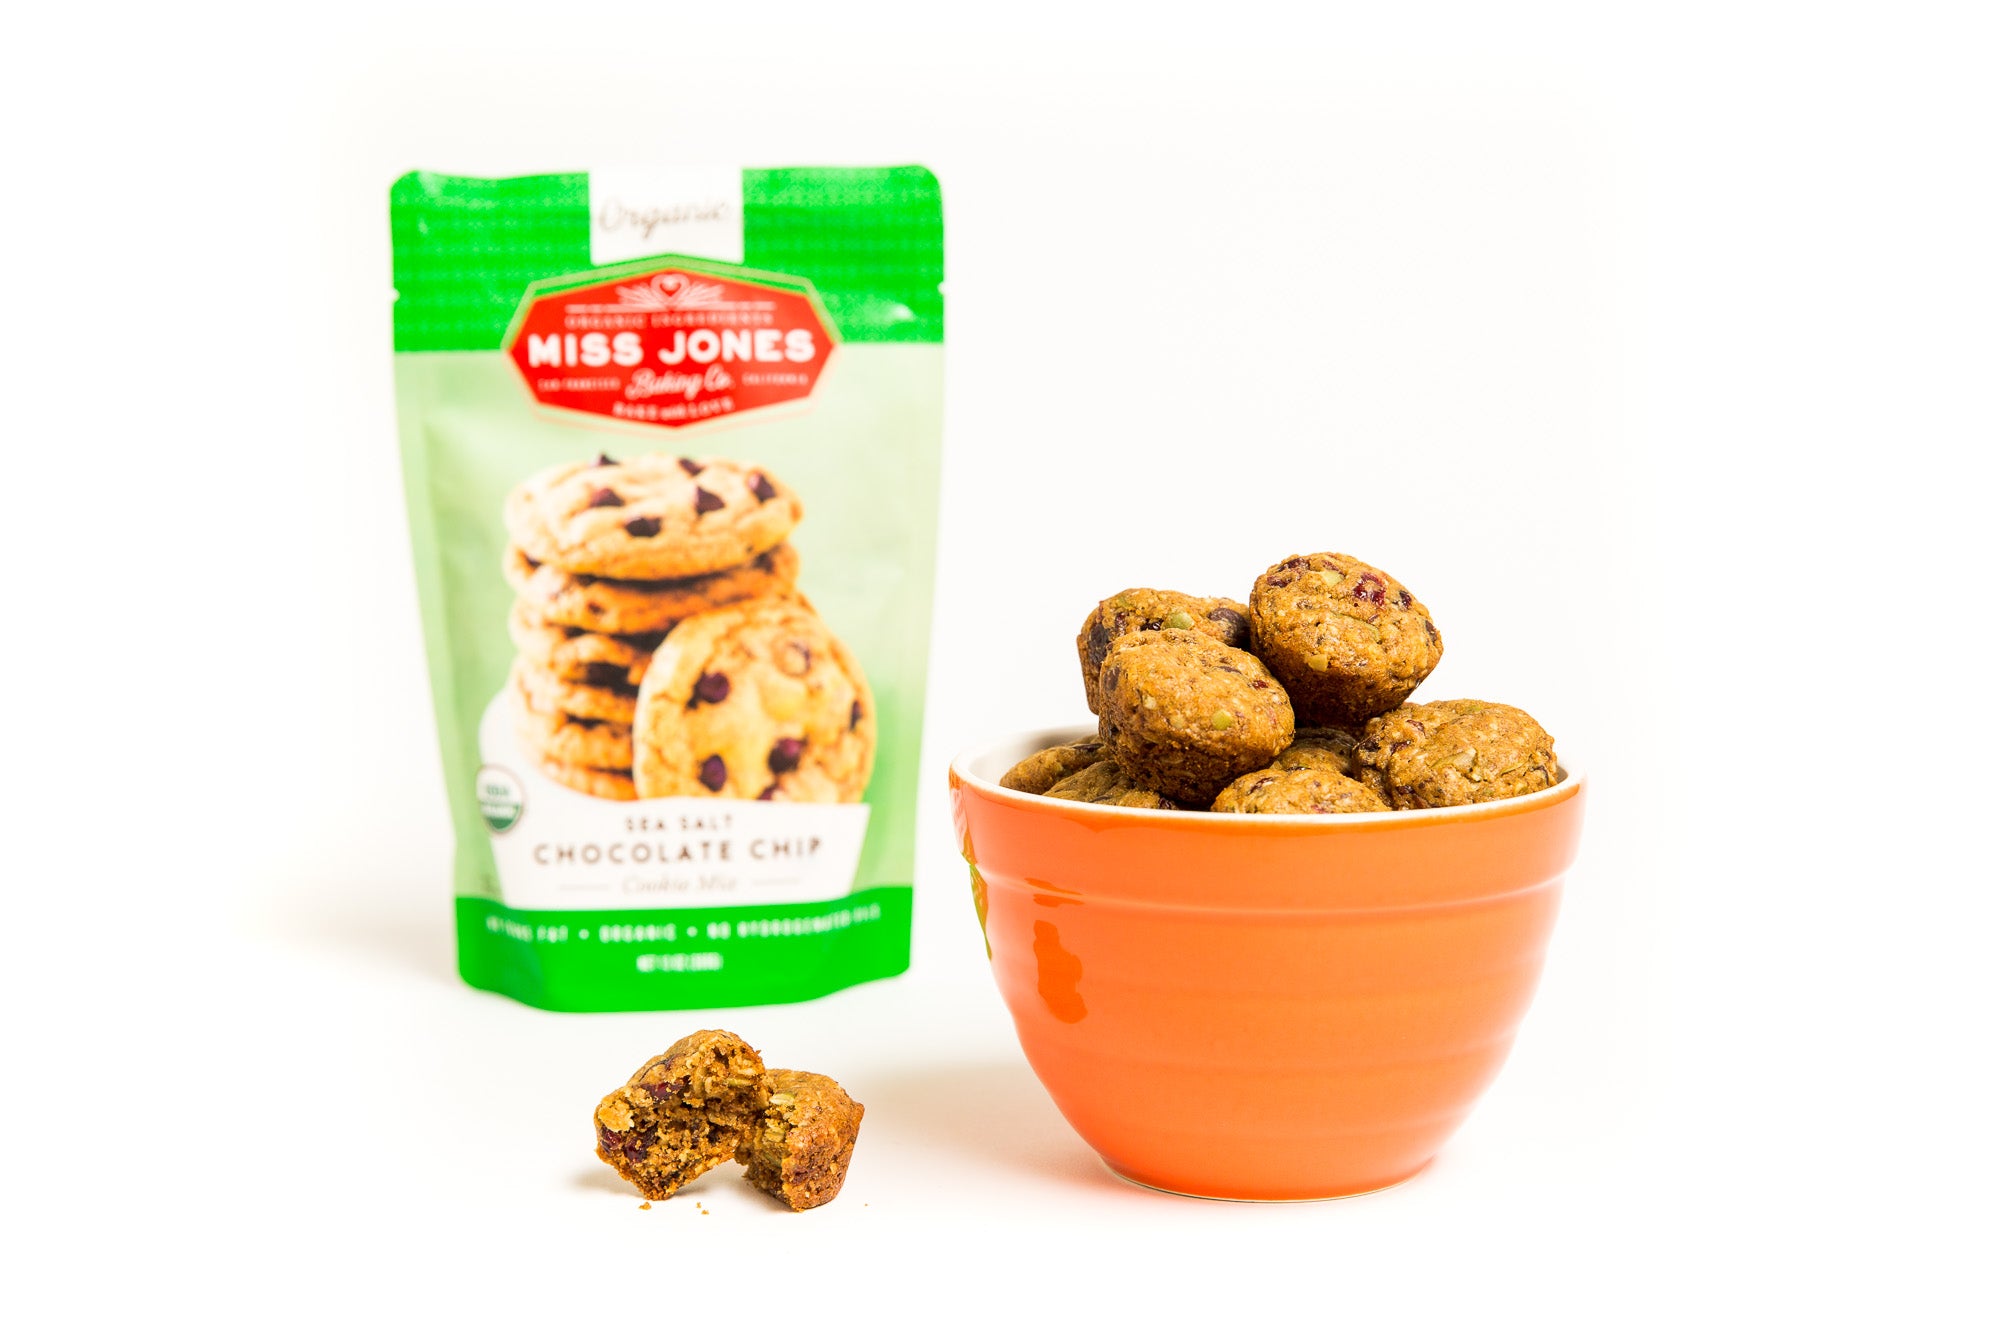 Image of a bag of Miss Jones Chocolate Chip Cookie Mix behind an orange bowl of Miss Jones Baking Co Happy Trails Mix Cookie Bites 